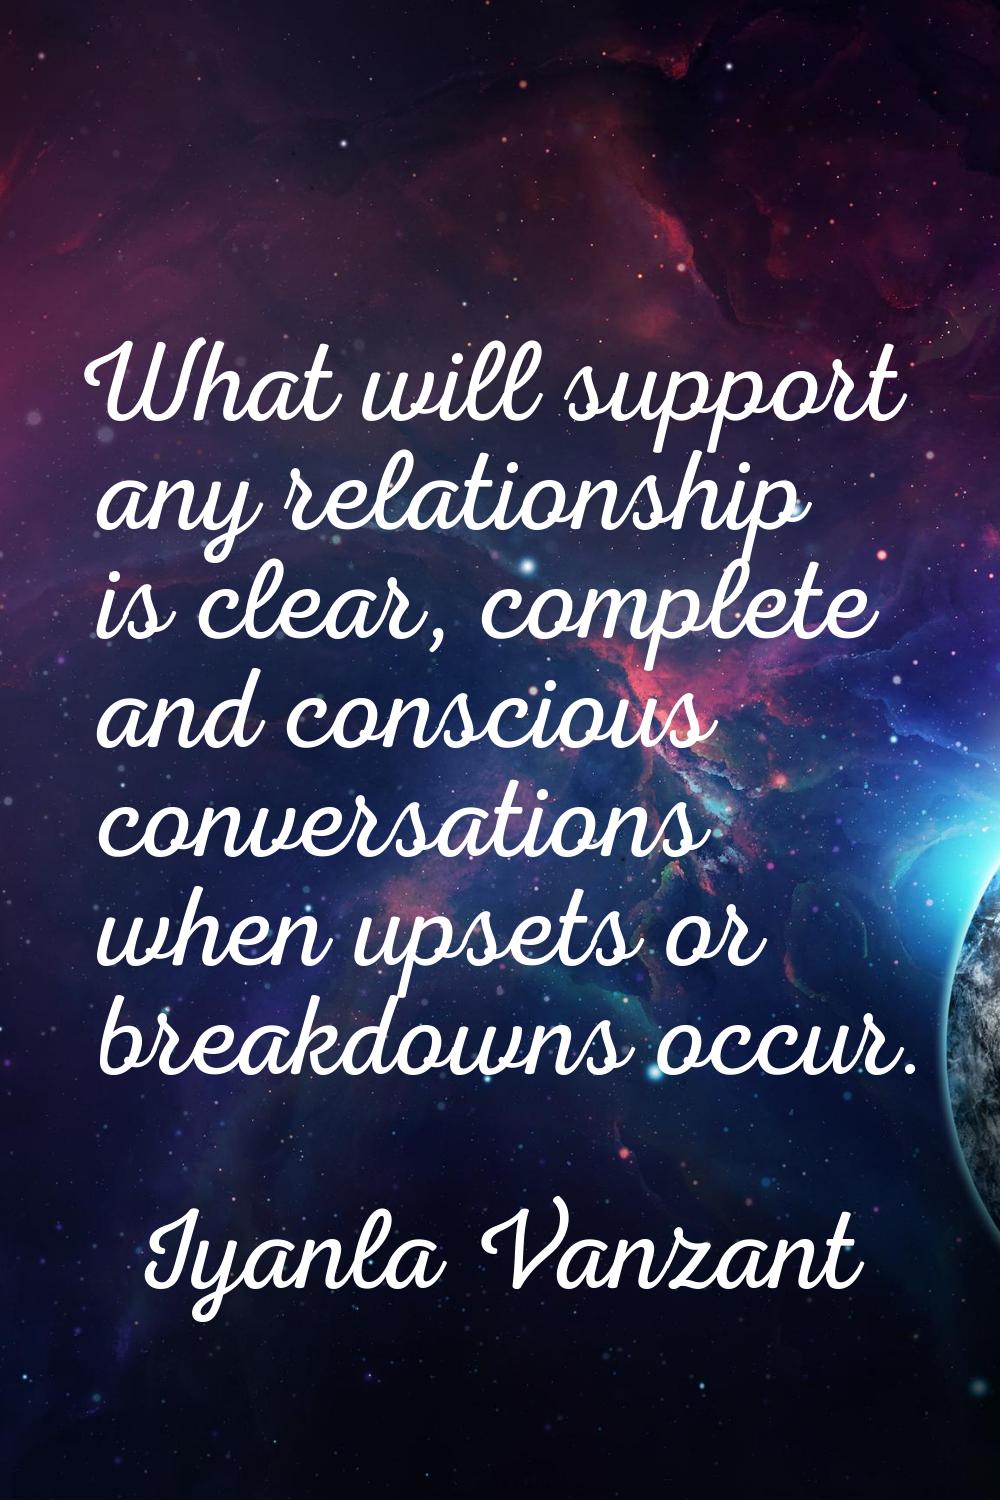 What will support any relationship is clear, complete and conscious conversations when upsets or br